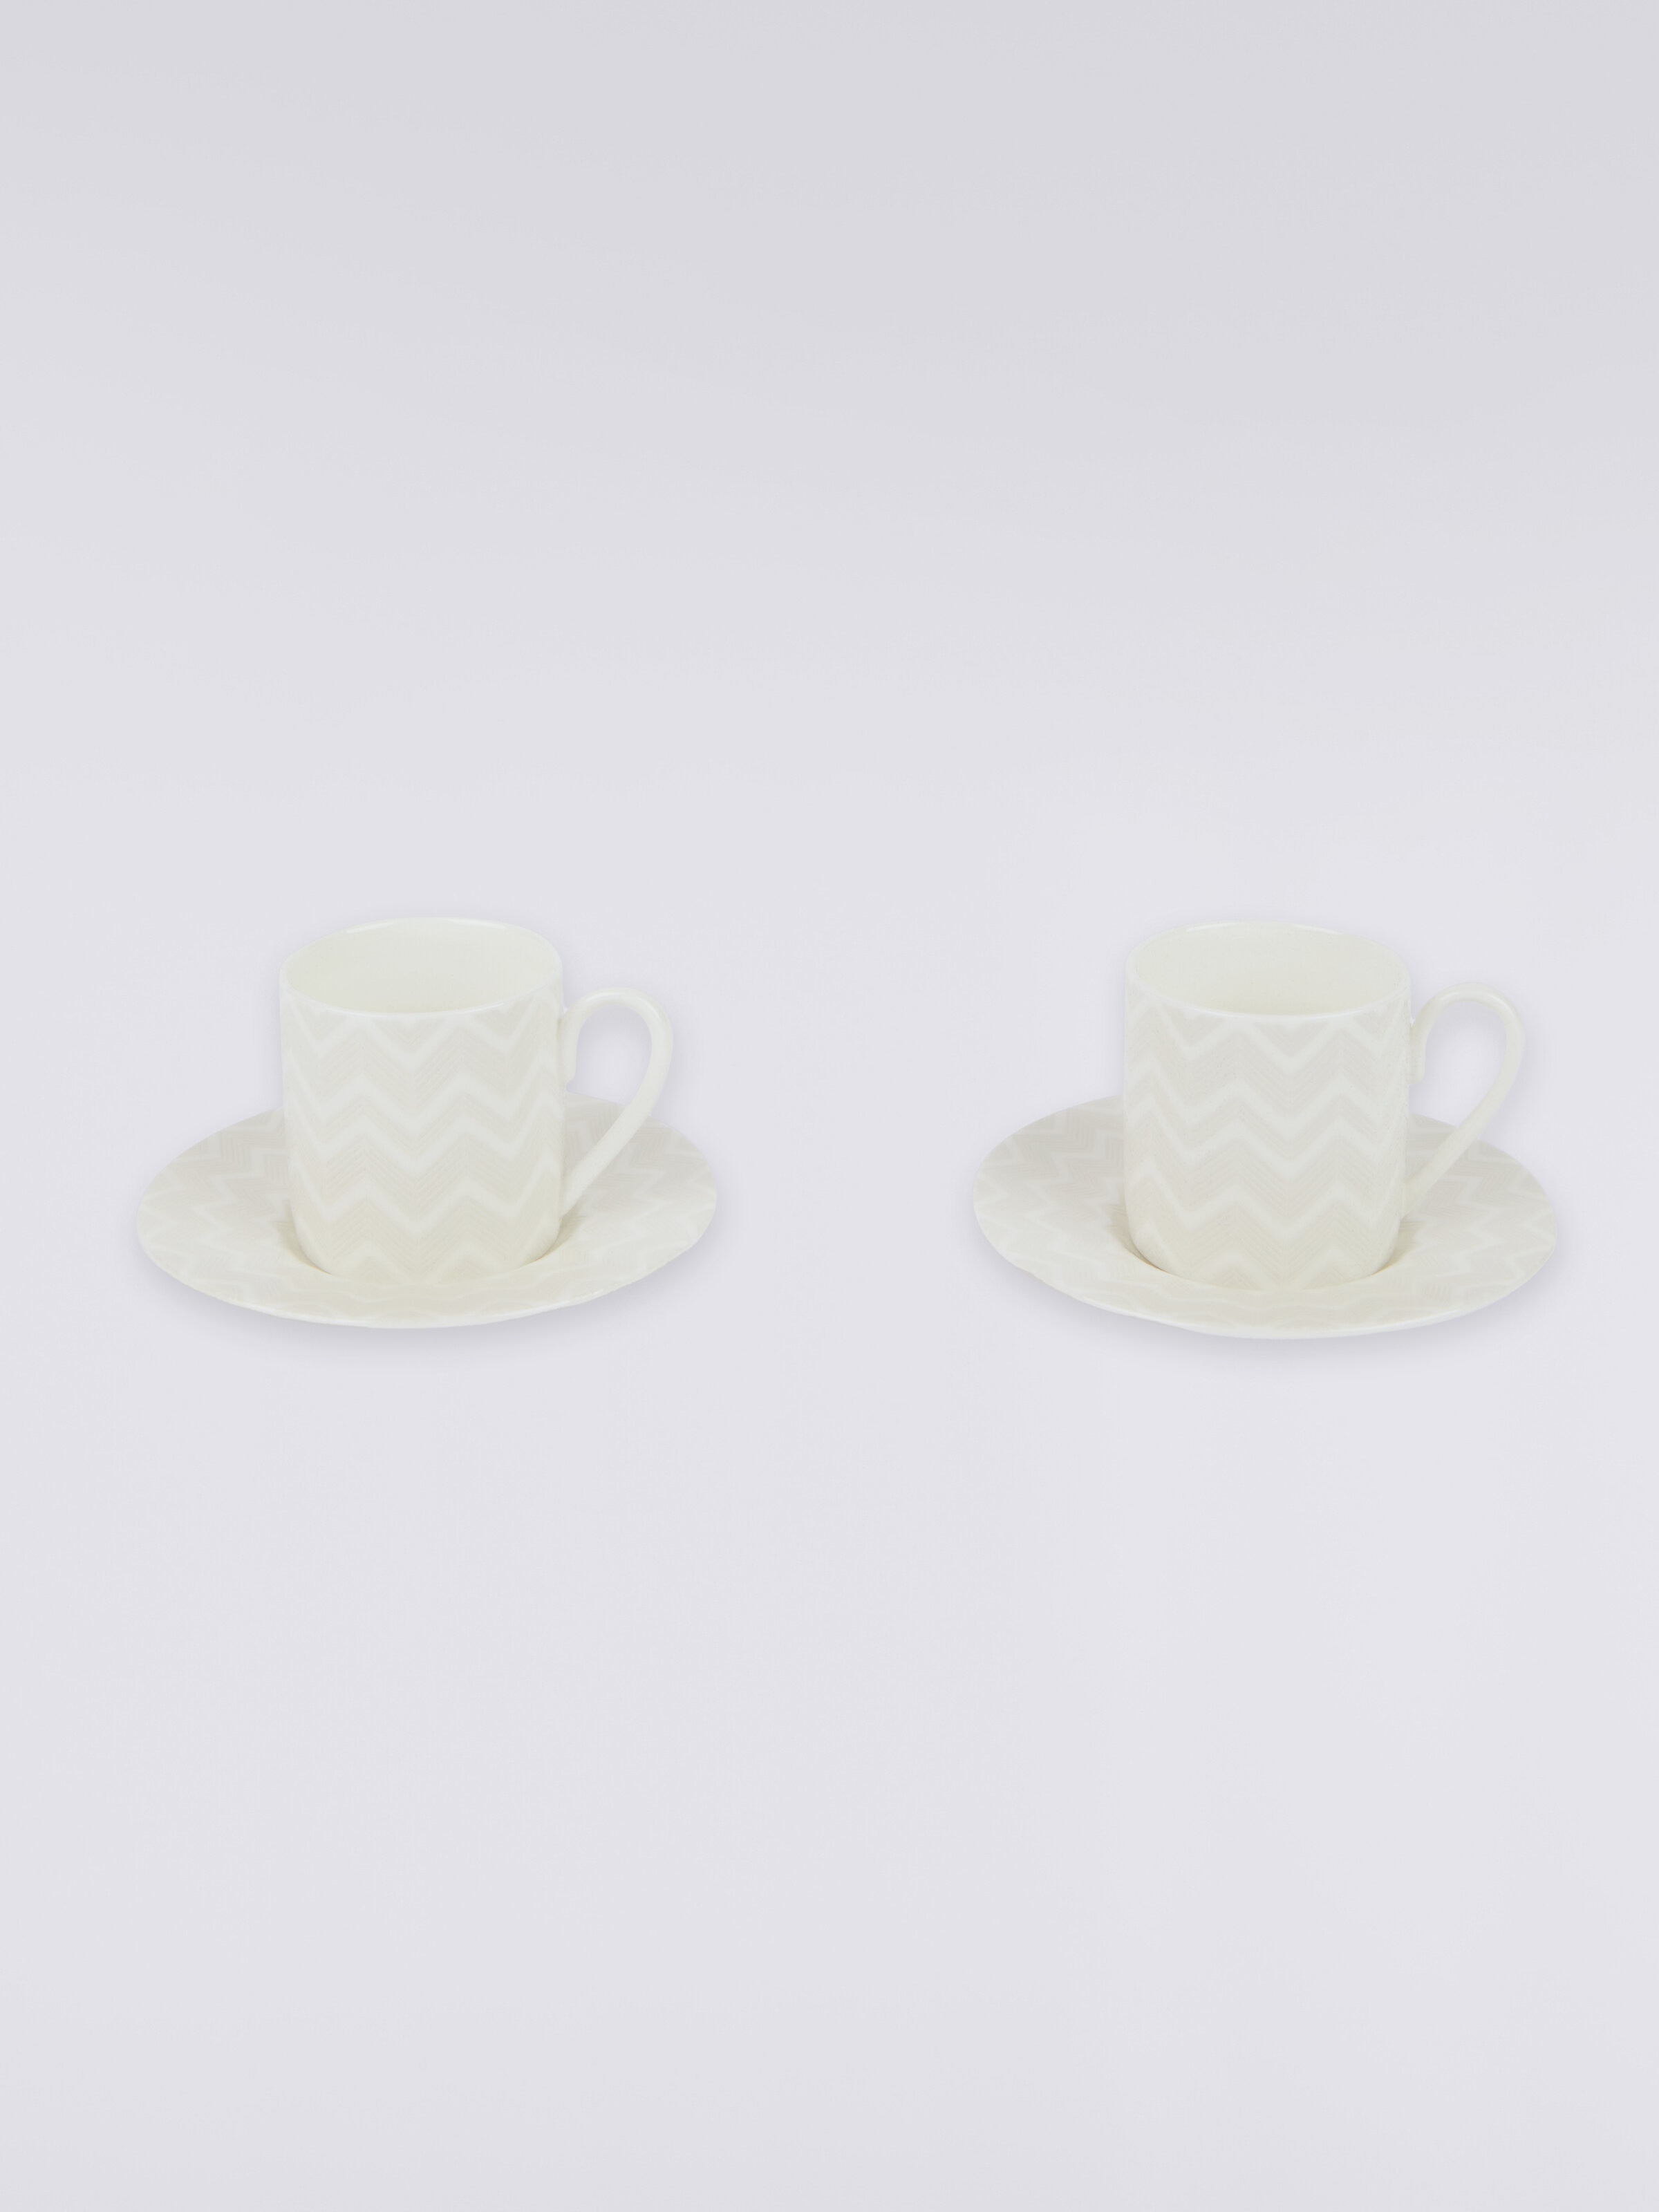 Zigzag White Set of 2 coffee cups & saucers, White  - 2